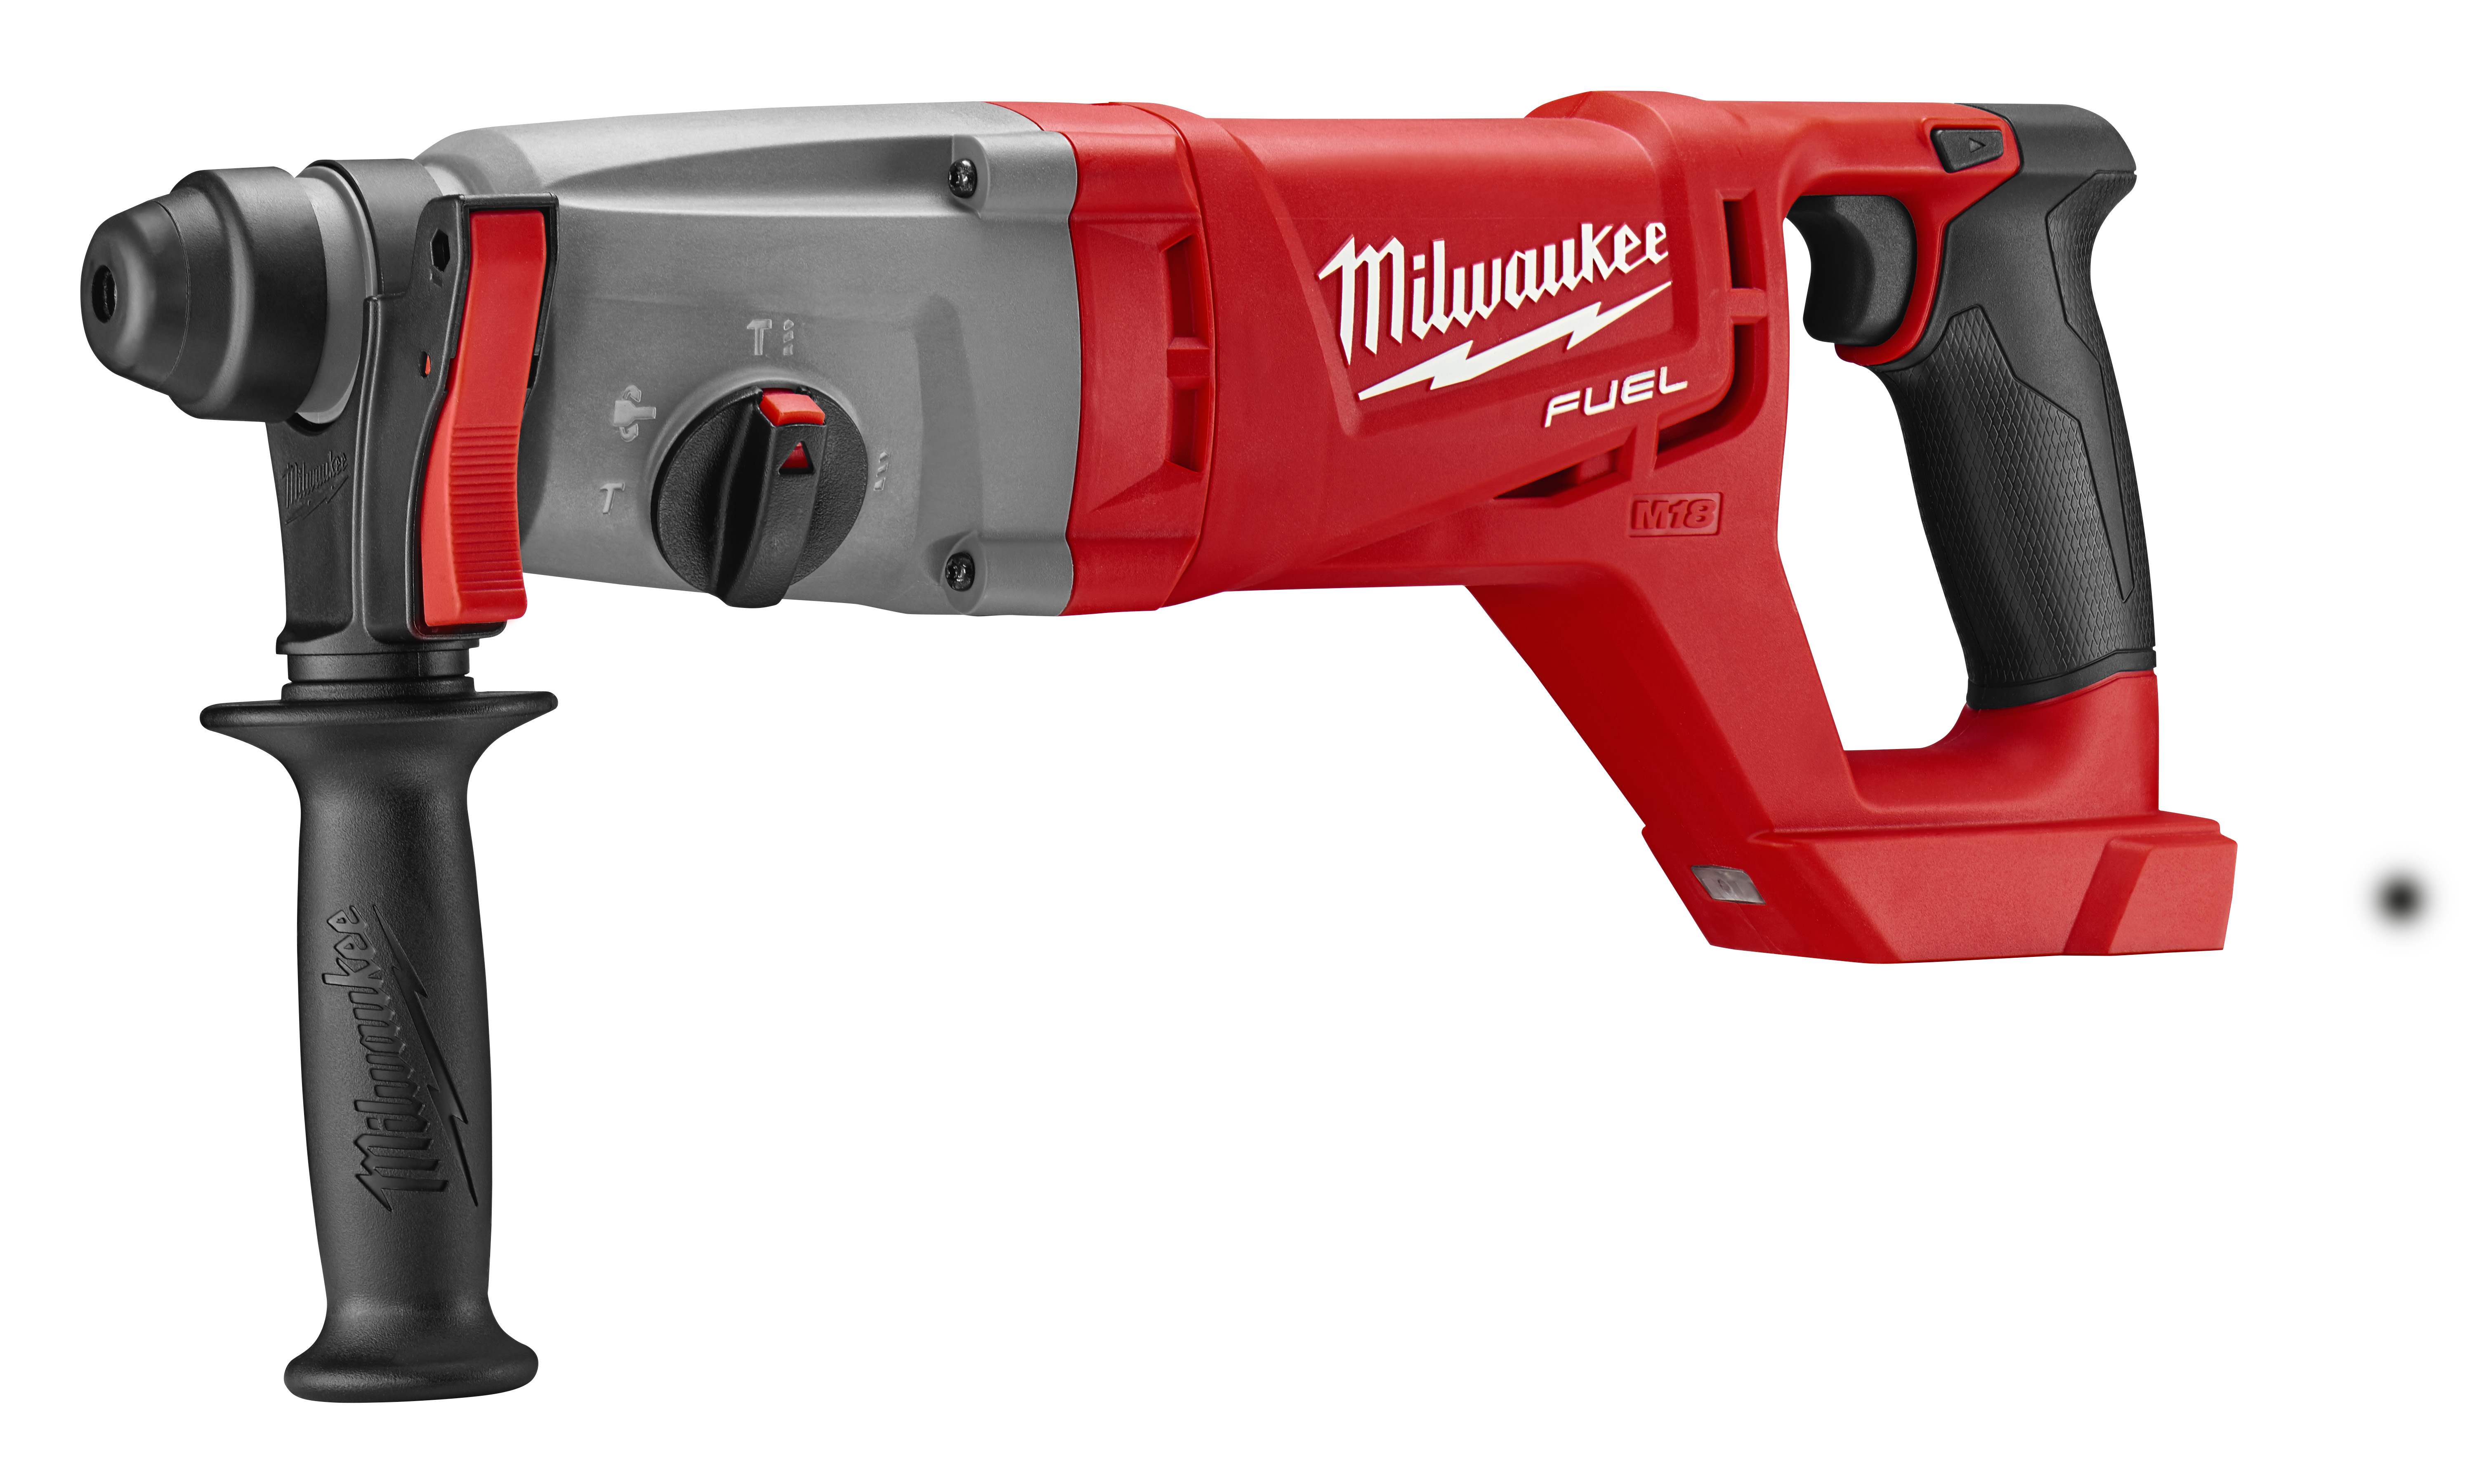 Powered by FUEL™ technology, the M18 FUEL™ 1 in. SDS plus D-handle rotary hammer delivers faster than corded speed, corded durability and all day work on one charge. The Milwaukee POWERSTATE brushless motor provides 2.1 ft. lbs of impact energy, 0-1,...